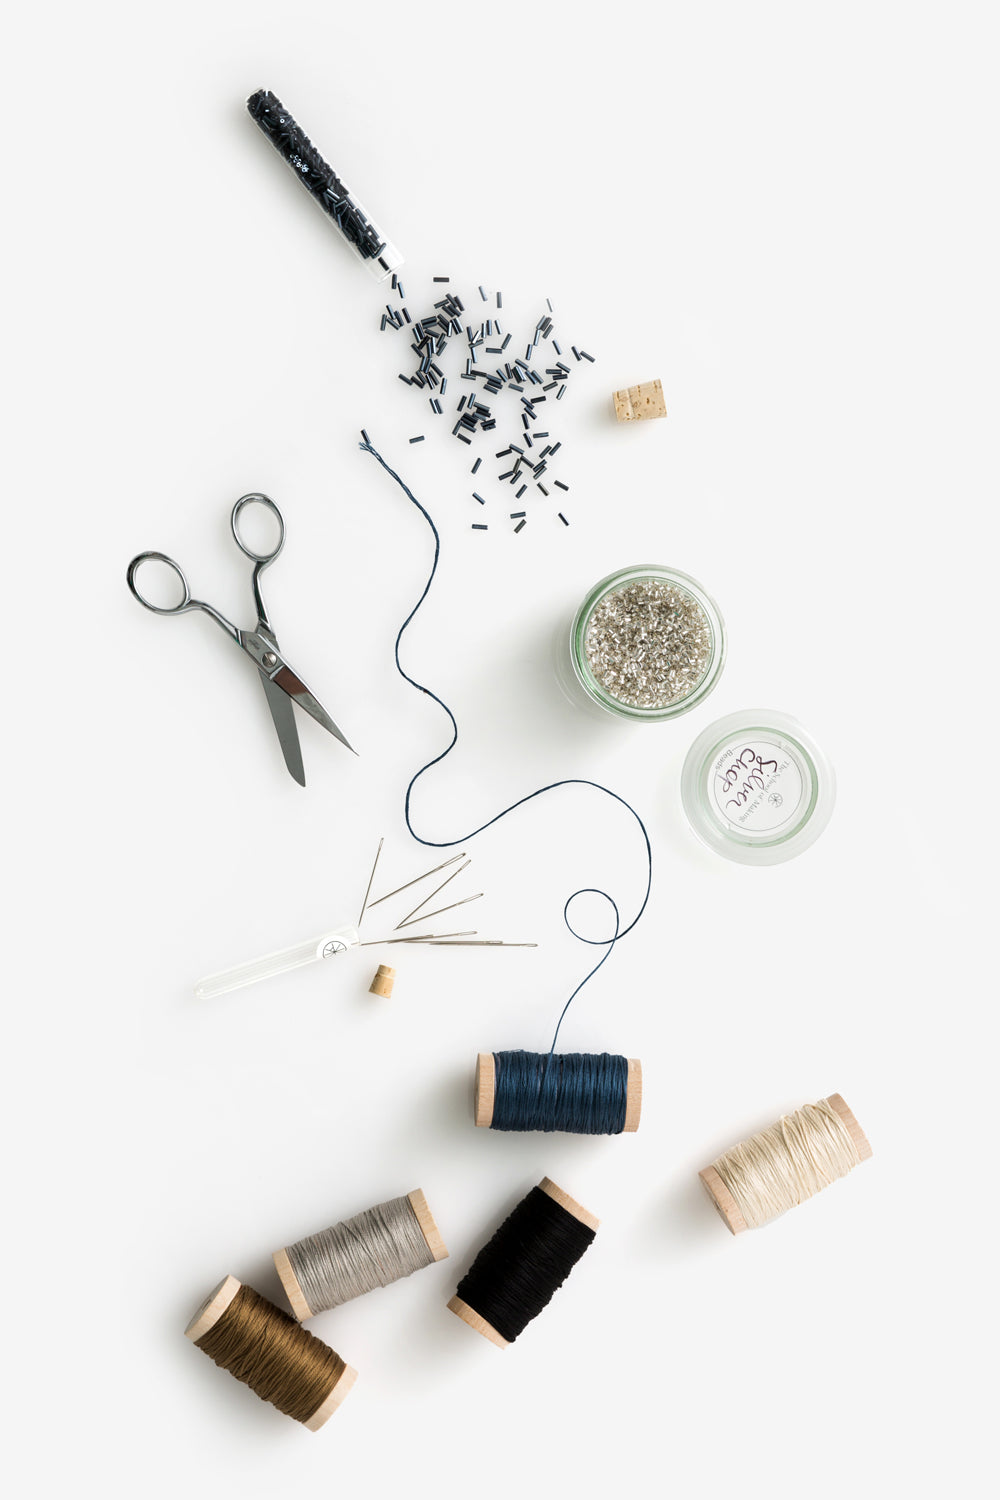 The School of Making Notions - Beads, Embroidery Floss, and Needles